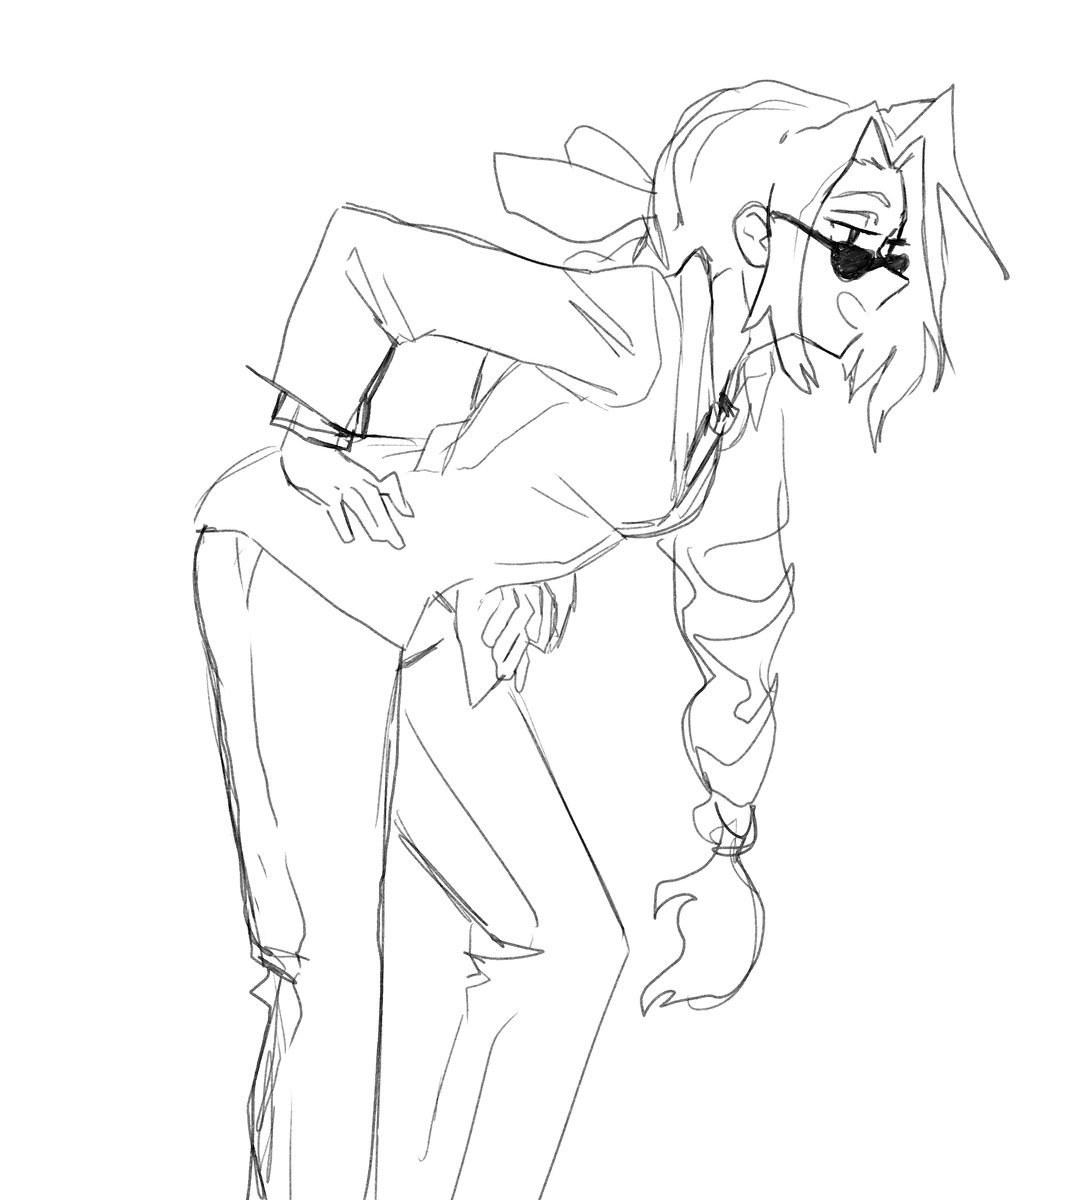 heres a doodle of aerith dressed as a trunks cuz ladies in suits 